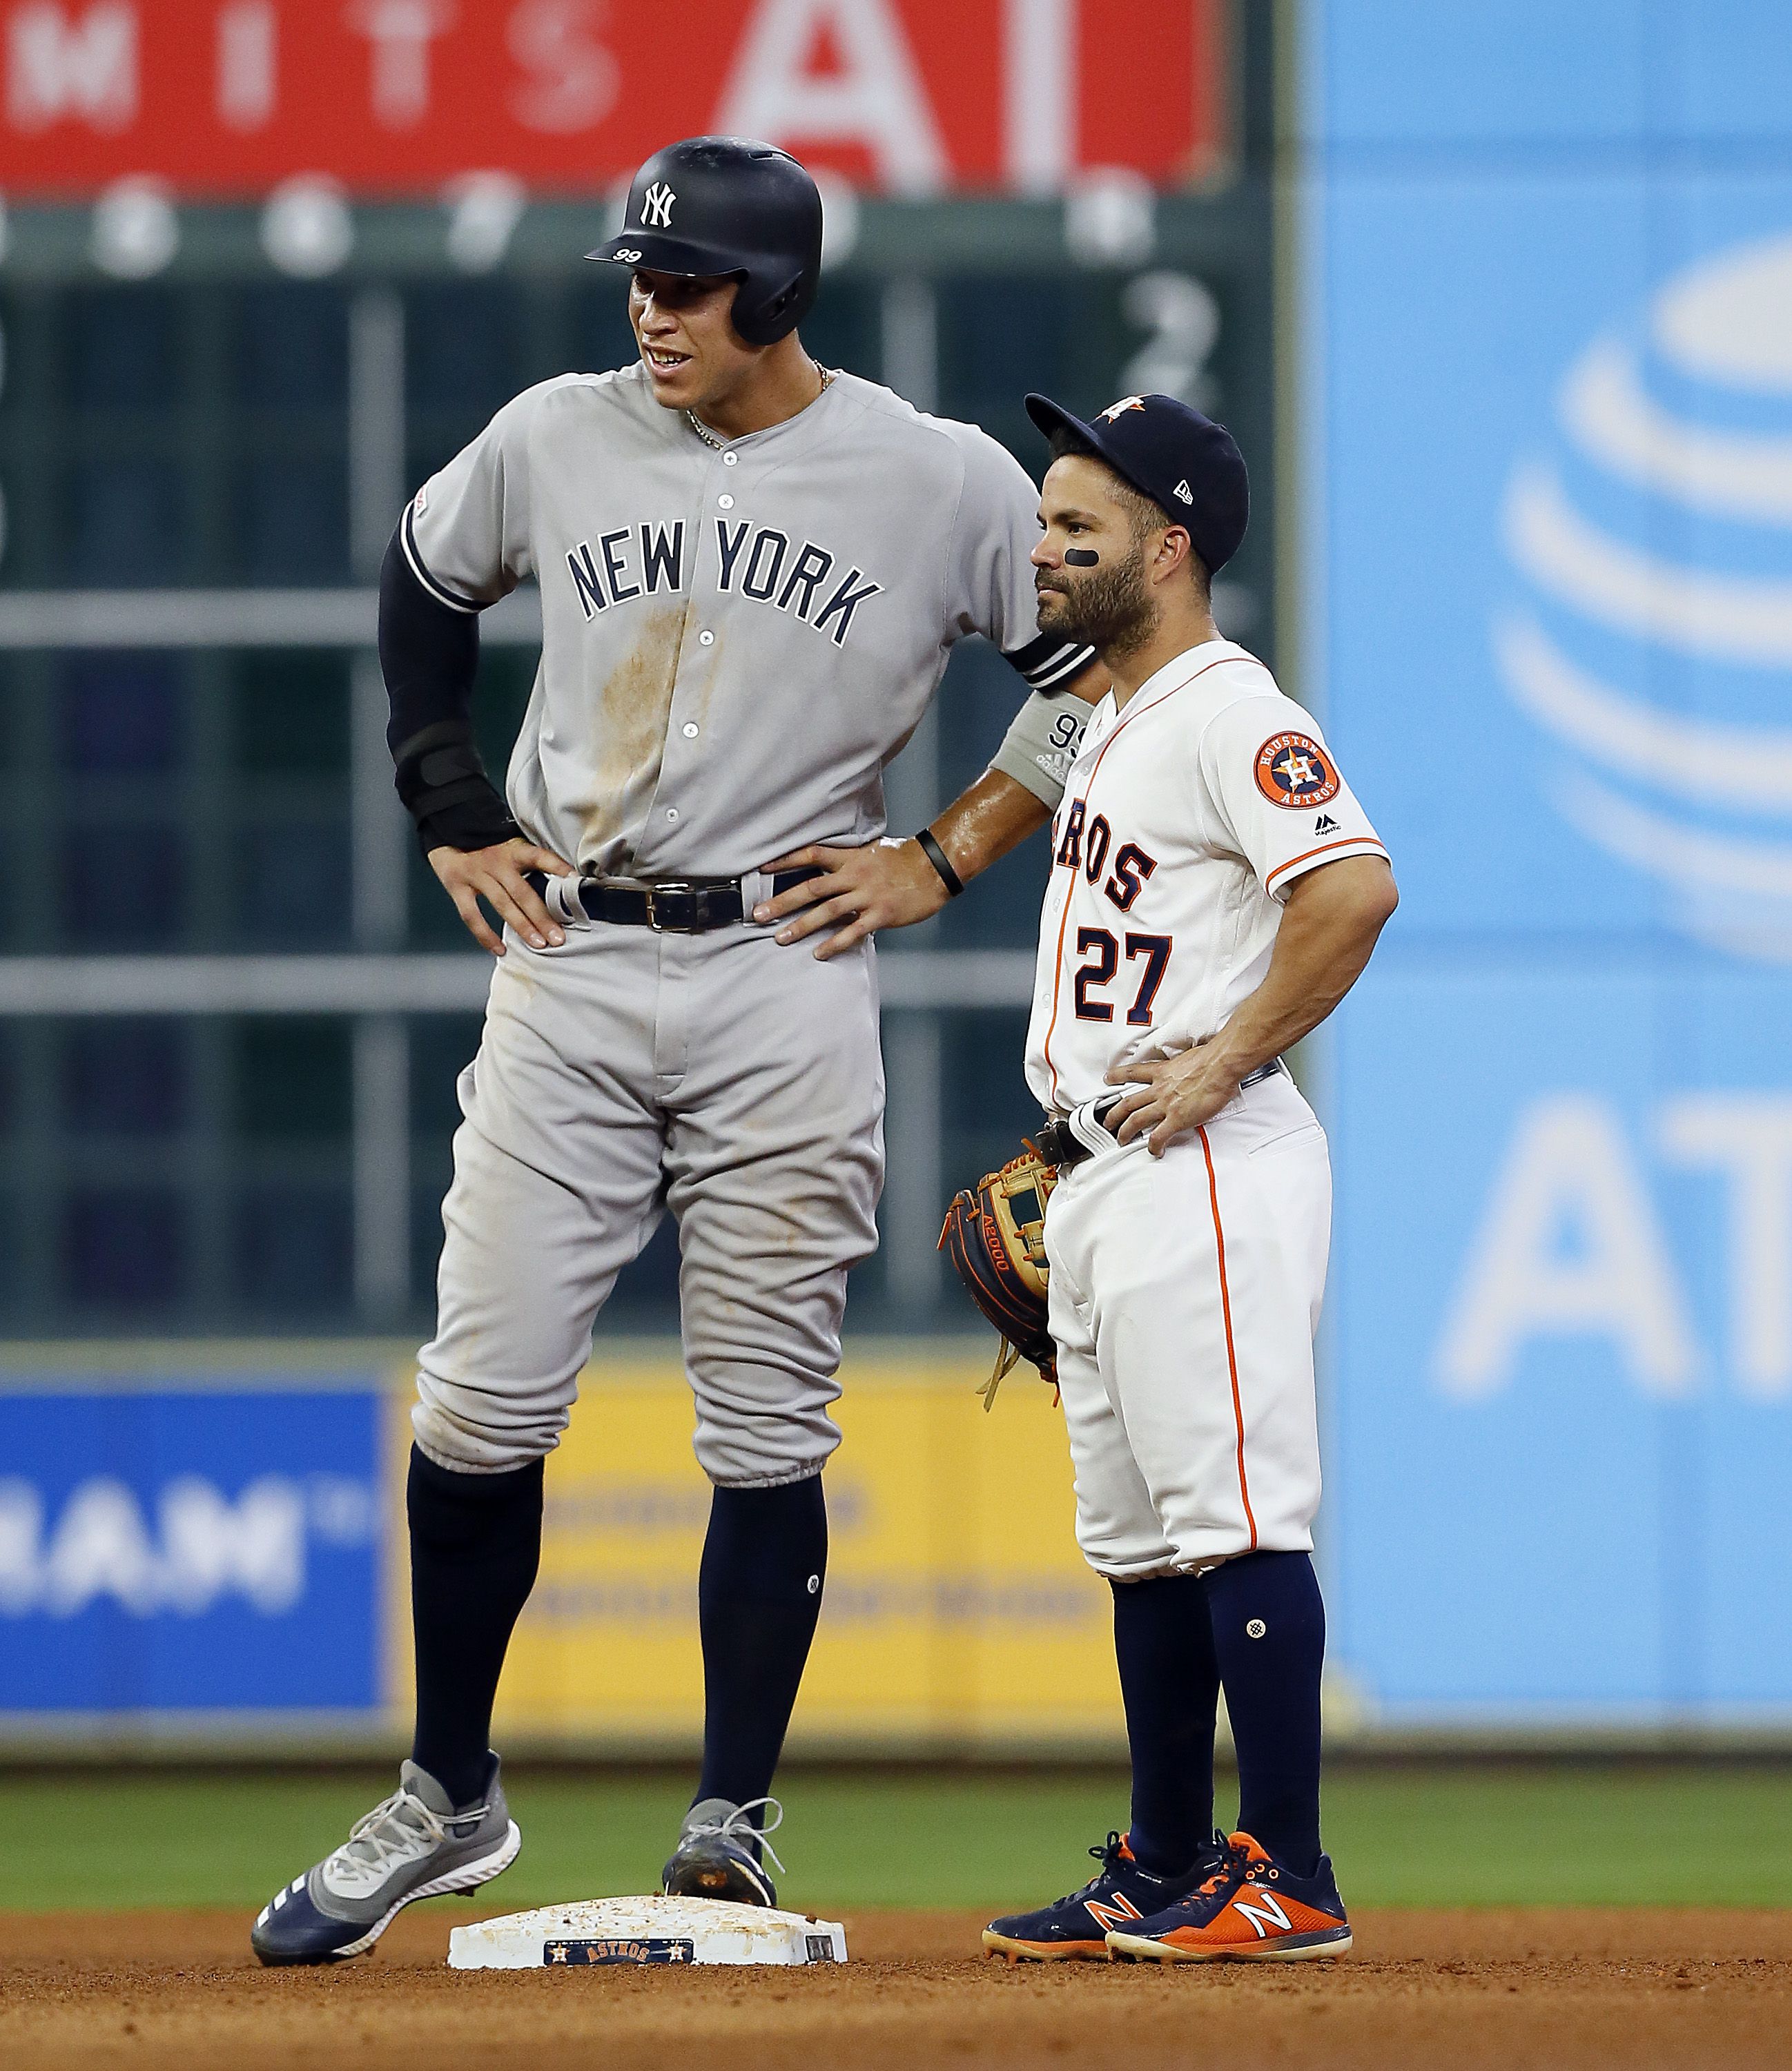 Photo: Jose Altuve stands while Yankees Aaron Judge celebrates in